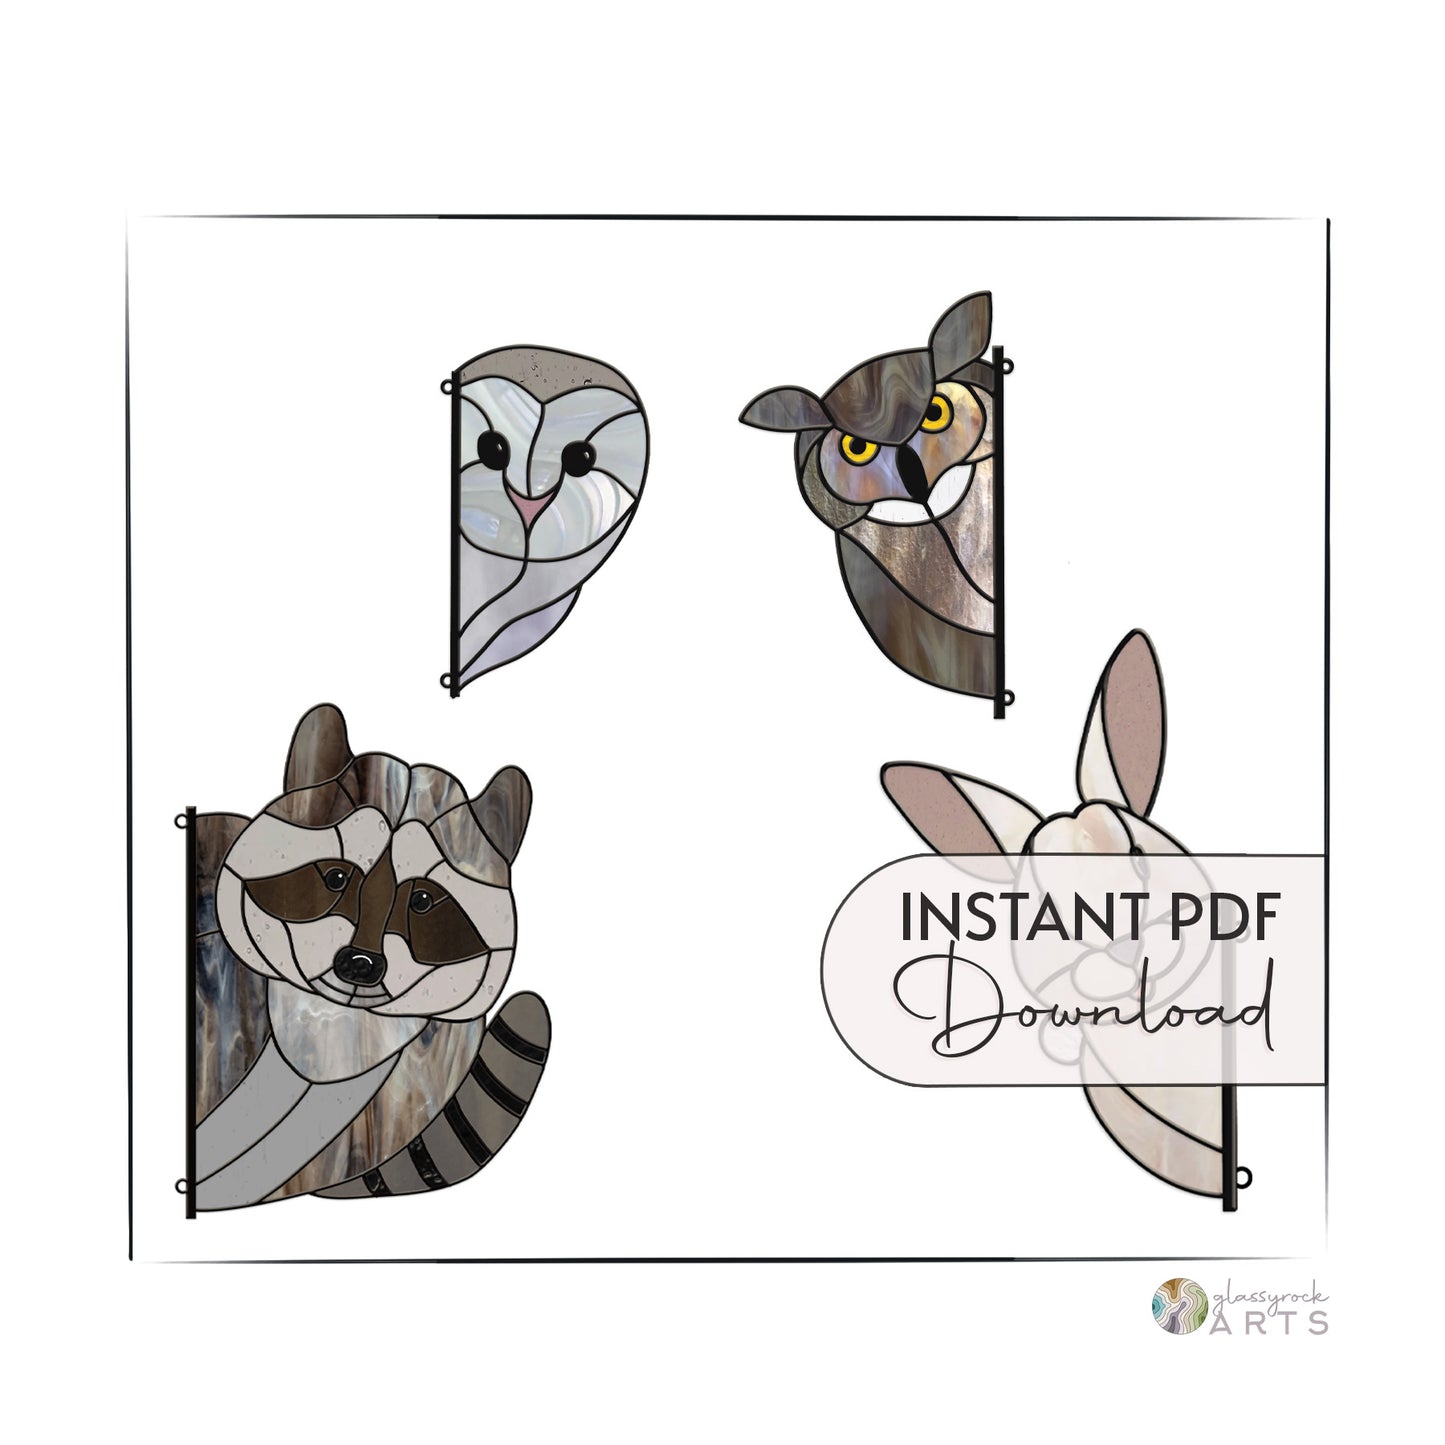 Curious Critters - Owls, Racoon, Bunny - Animal Stained Glass Patterns